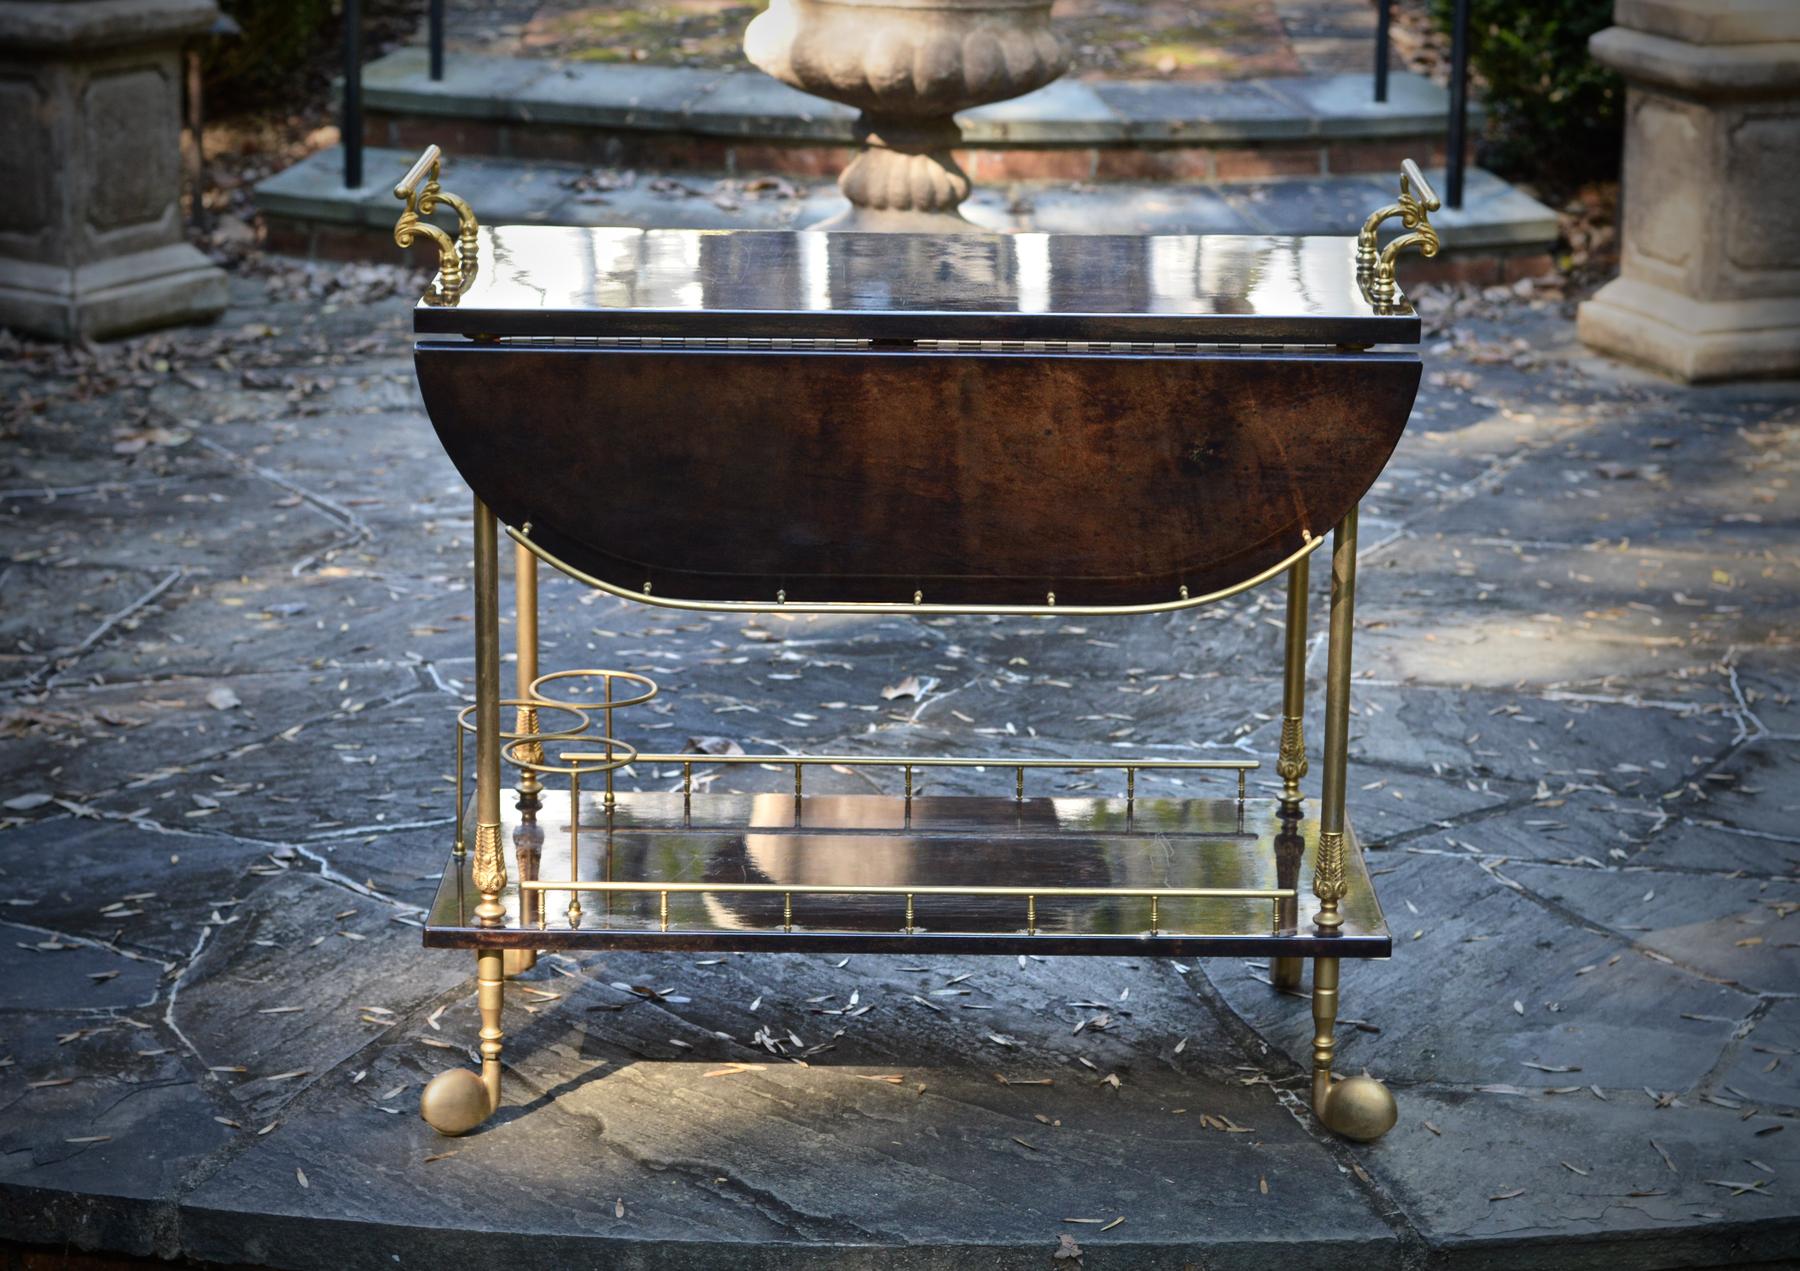 An iconic bar cart / trolley of lacquered goatskin in a fetching tobacco brown with gilt brass hardware by esteemed Italian designer Aldo Tura. Labelled underside, the mid 1960s drink server brings all the right classic and sophisticated